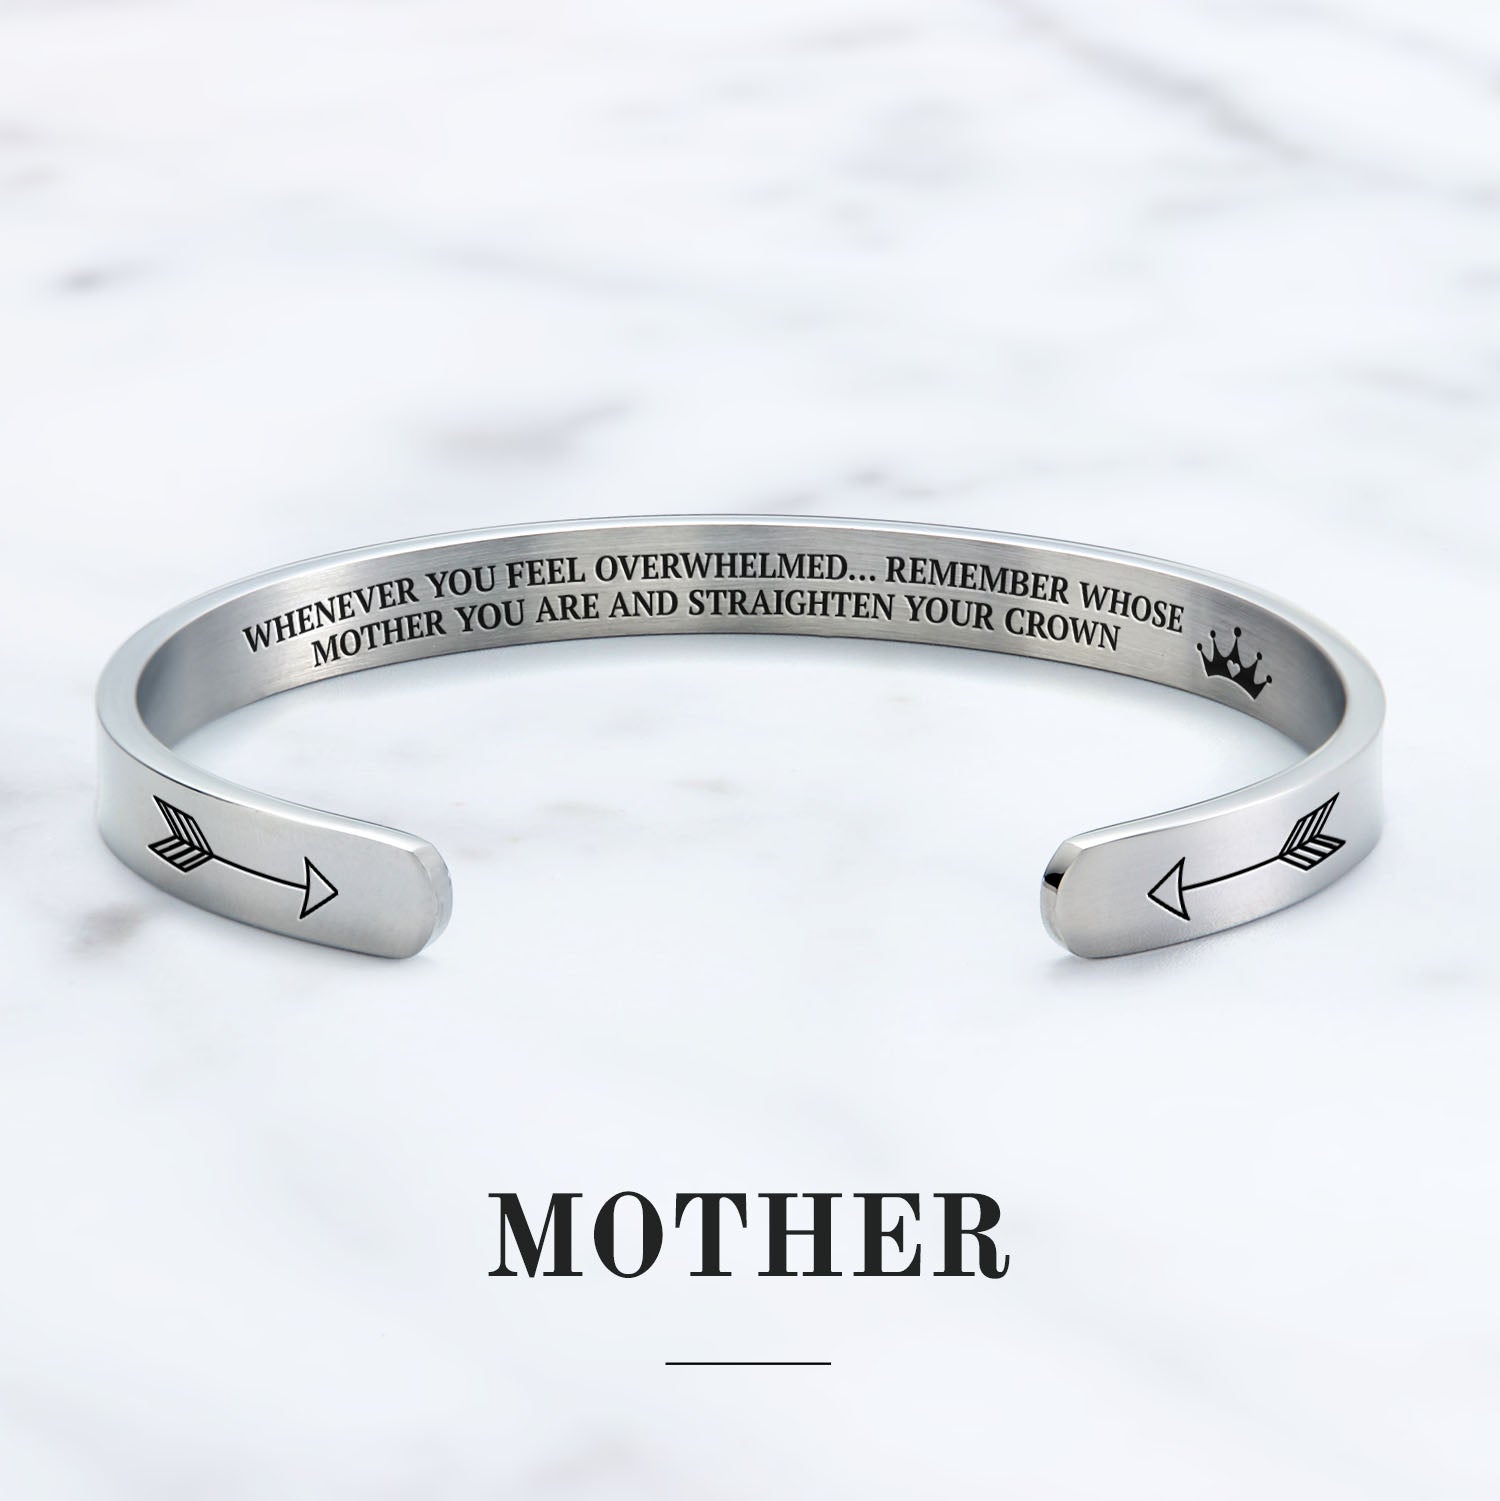 Remember Who You Are and Straighten Your Crown Personalizable Cuff Bracelet